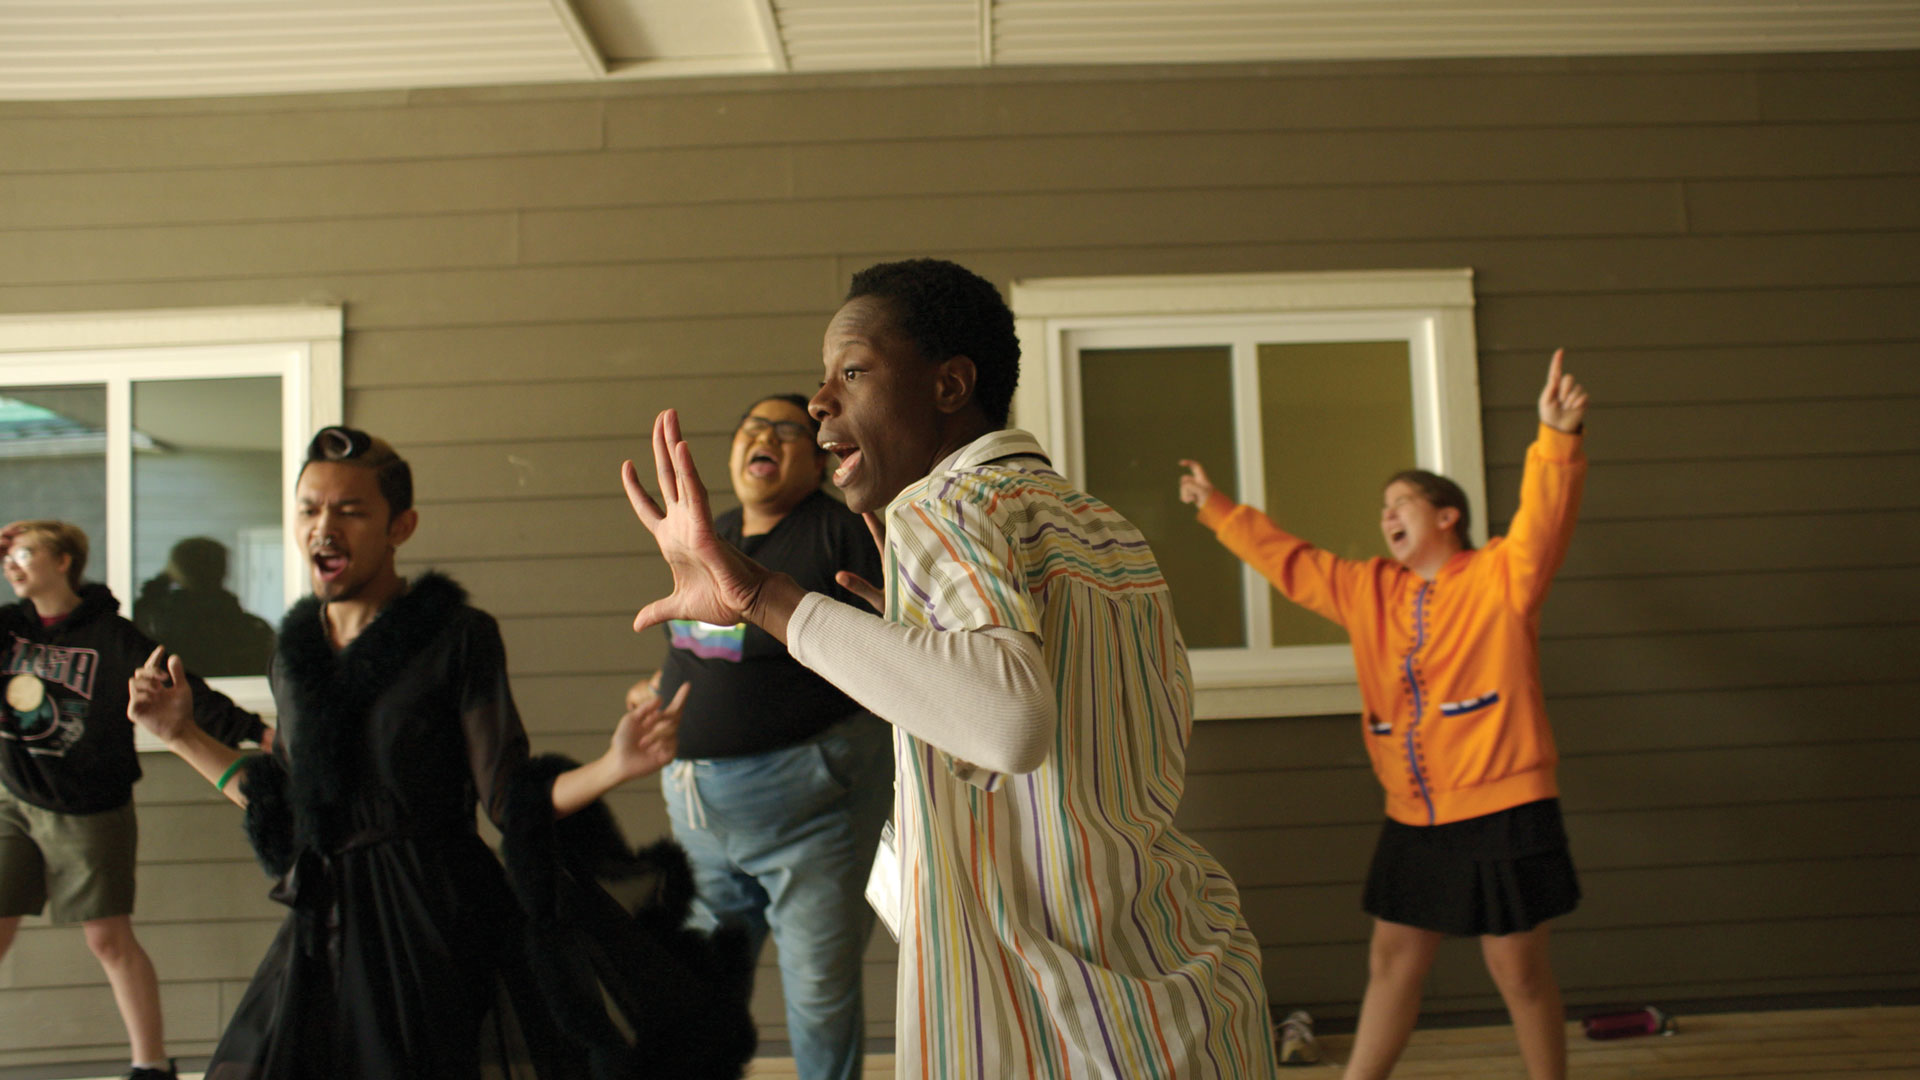 A group of young people dance joyfully.